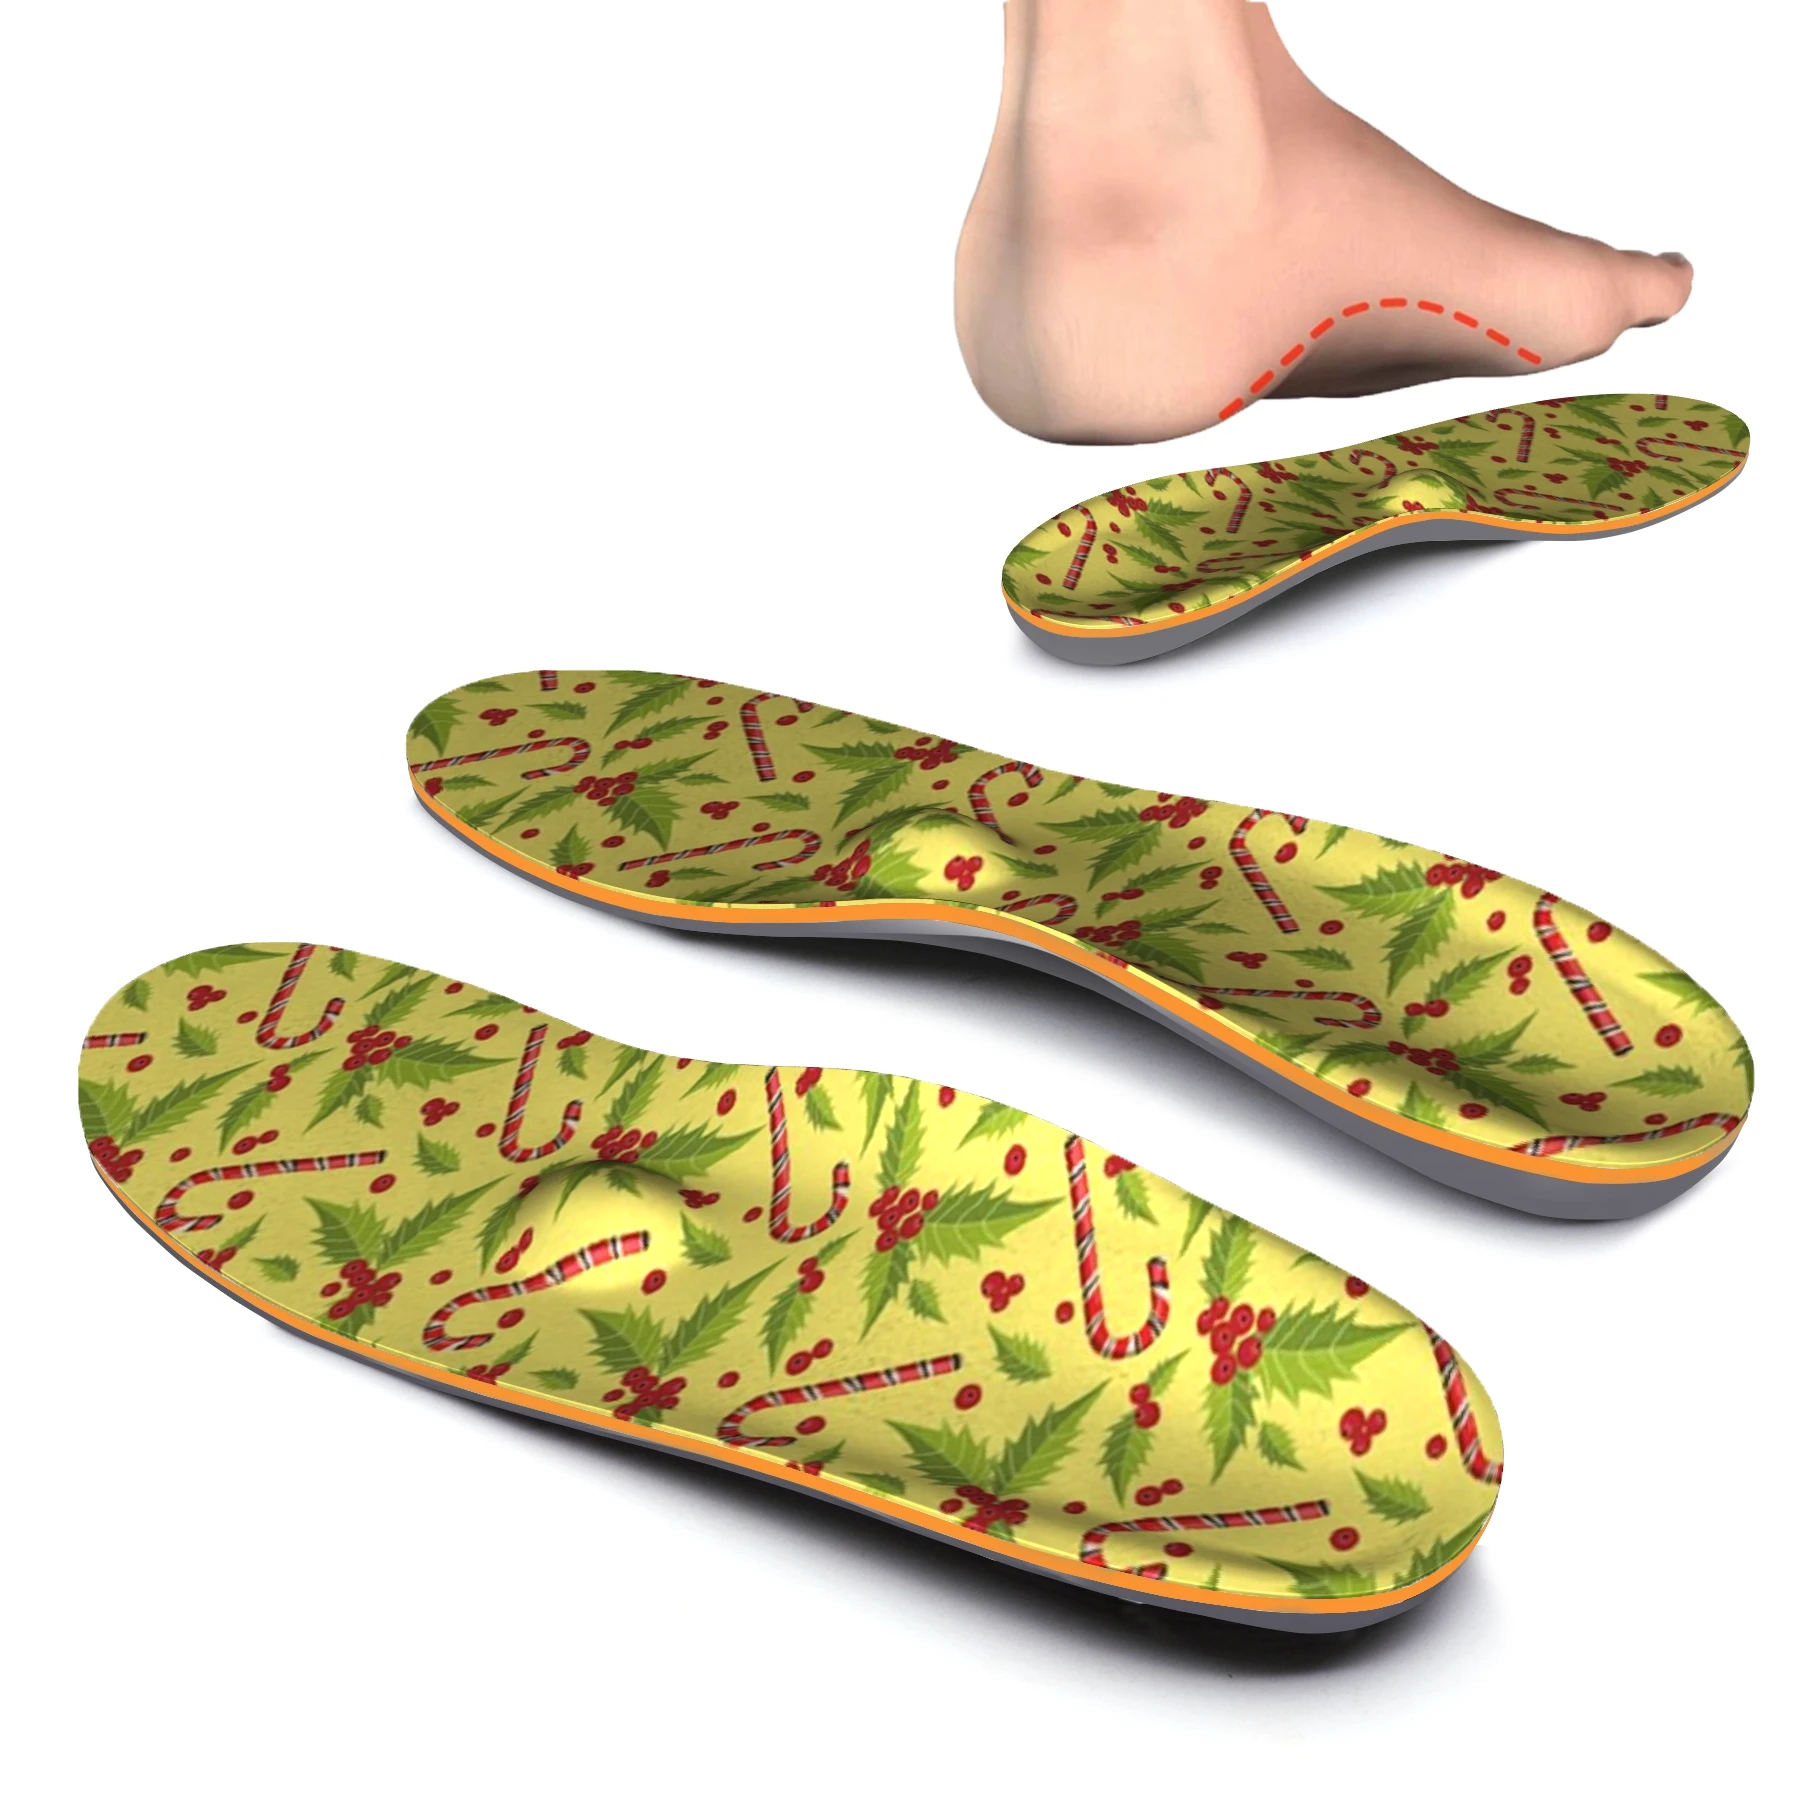 Yellow Design Non-slip High Arch Support Insole for Lighten Forefoot Pain, Plantar Fasciitis and Pain Pressure